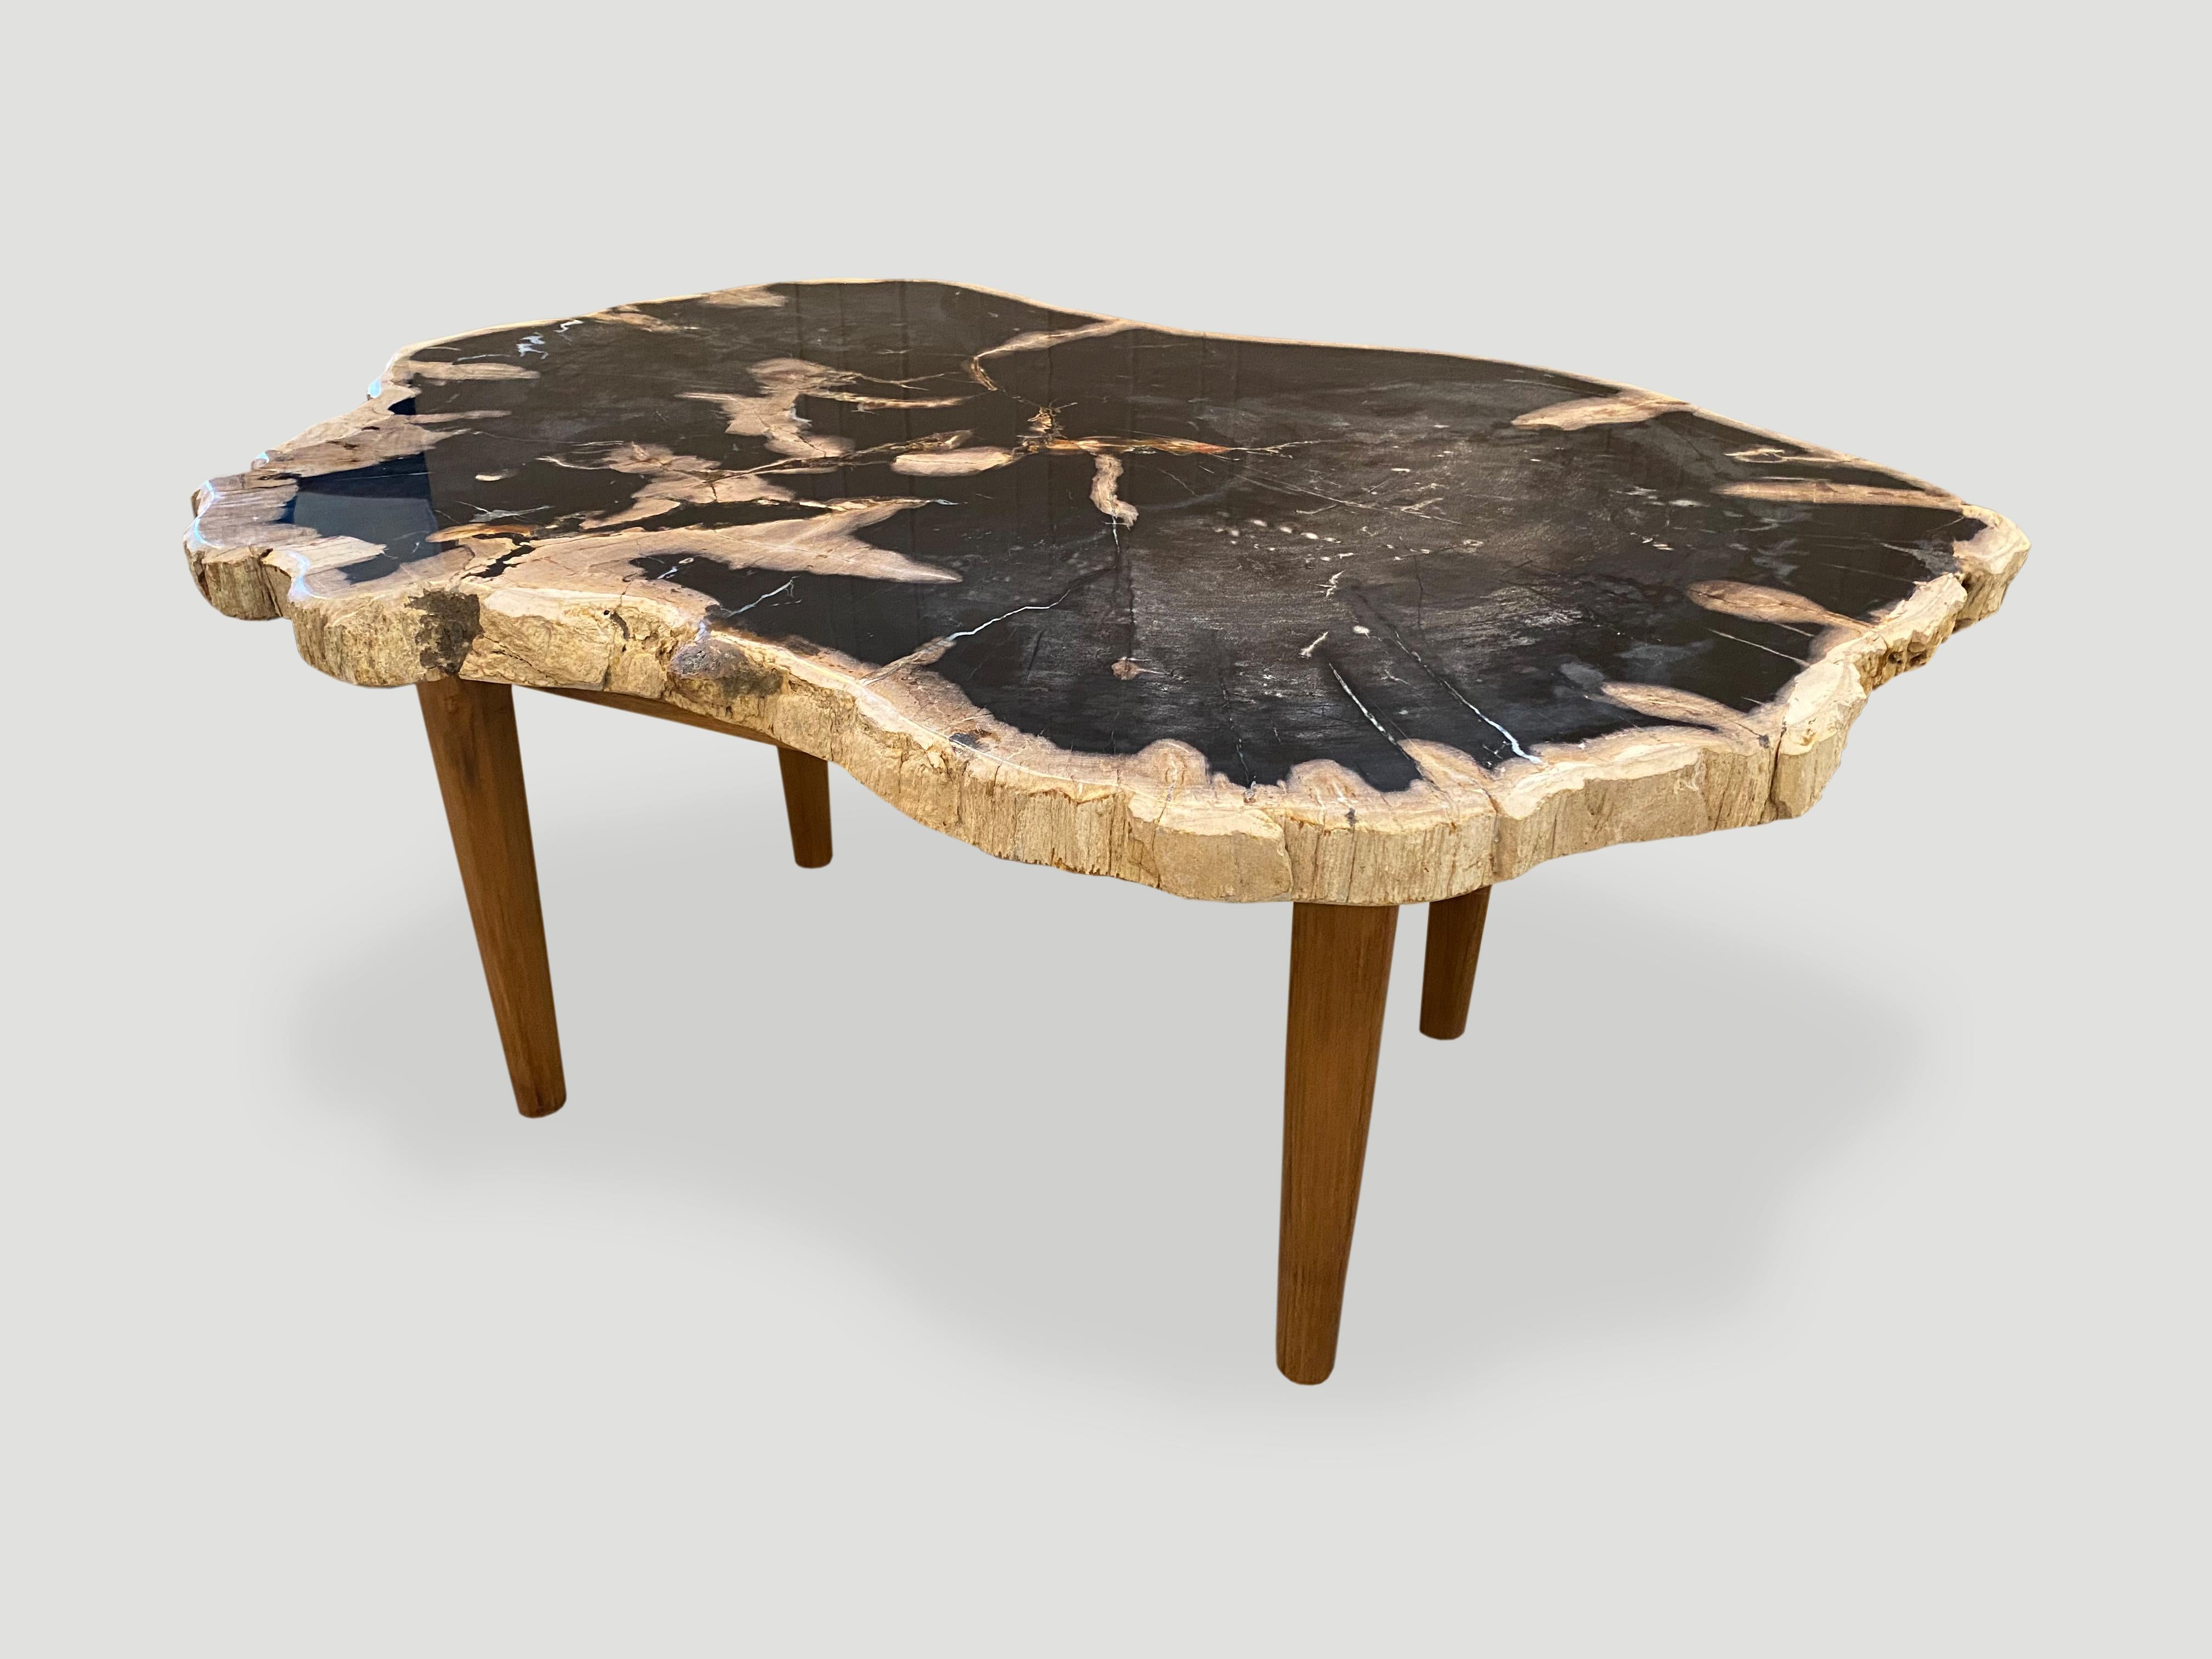 Beautiful live edge petrified wood slab coffee table resting on a natural teak base. So much better viewed in person as the glass like finish on this slab is unable to be captured in an image. We have a pair cut from the same log. The size and